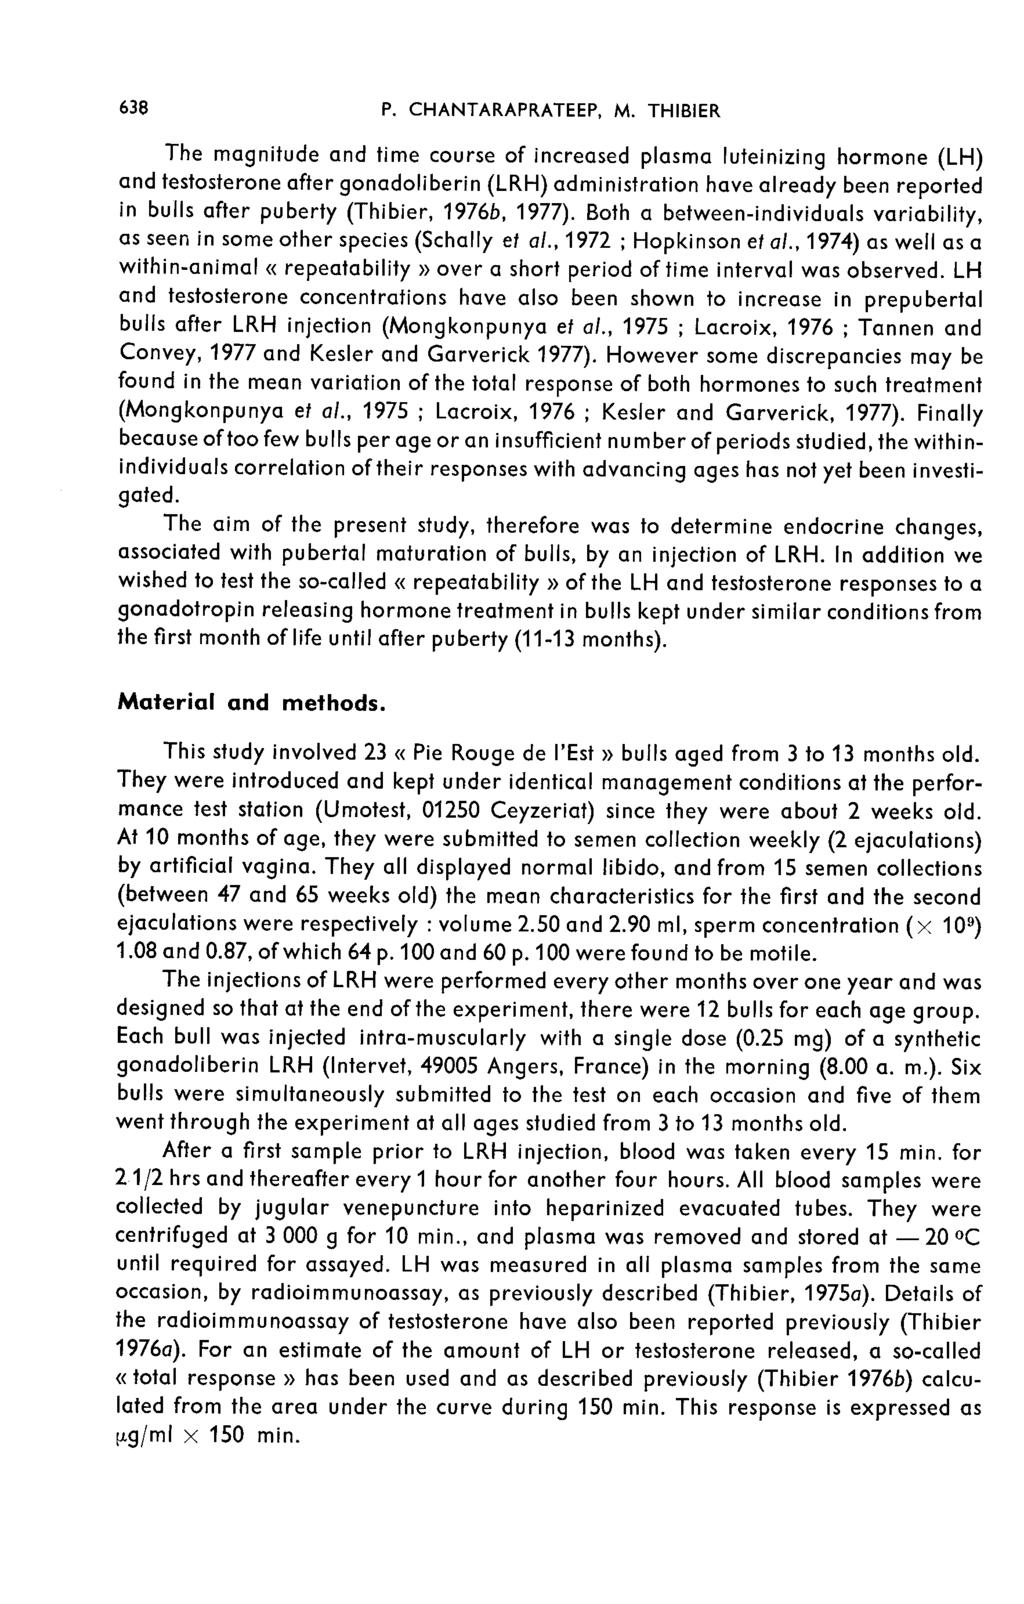 The magnitude and time course of increased plasma luteinizing hormone (LH) and testosterone after gonadoliberin (LRH) administration have already been reported in bulls after puberty (Thibier, 1976b,